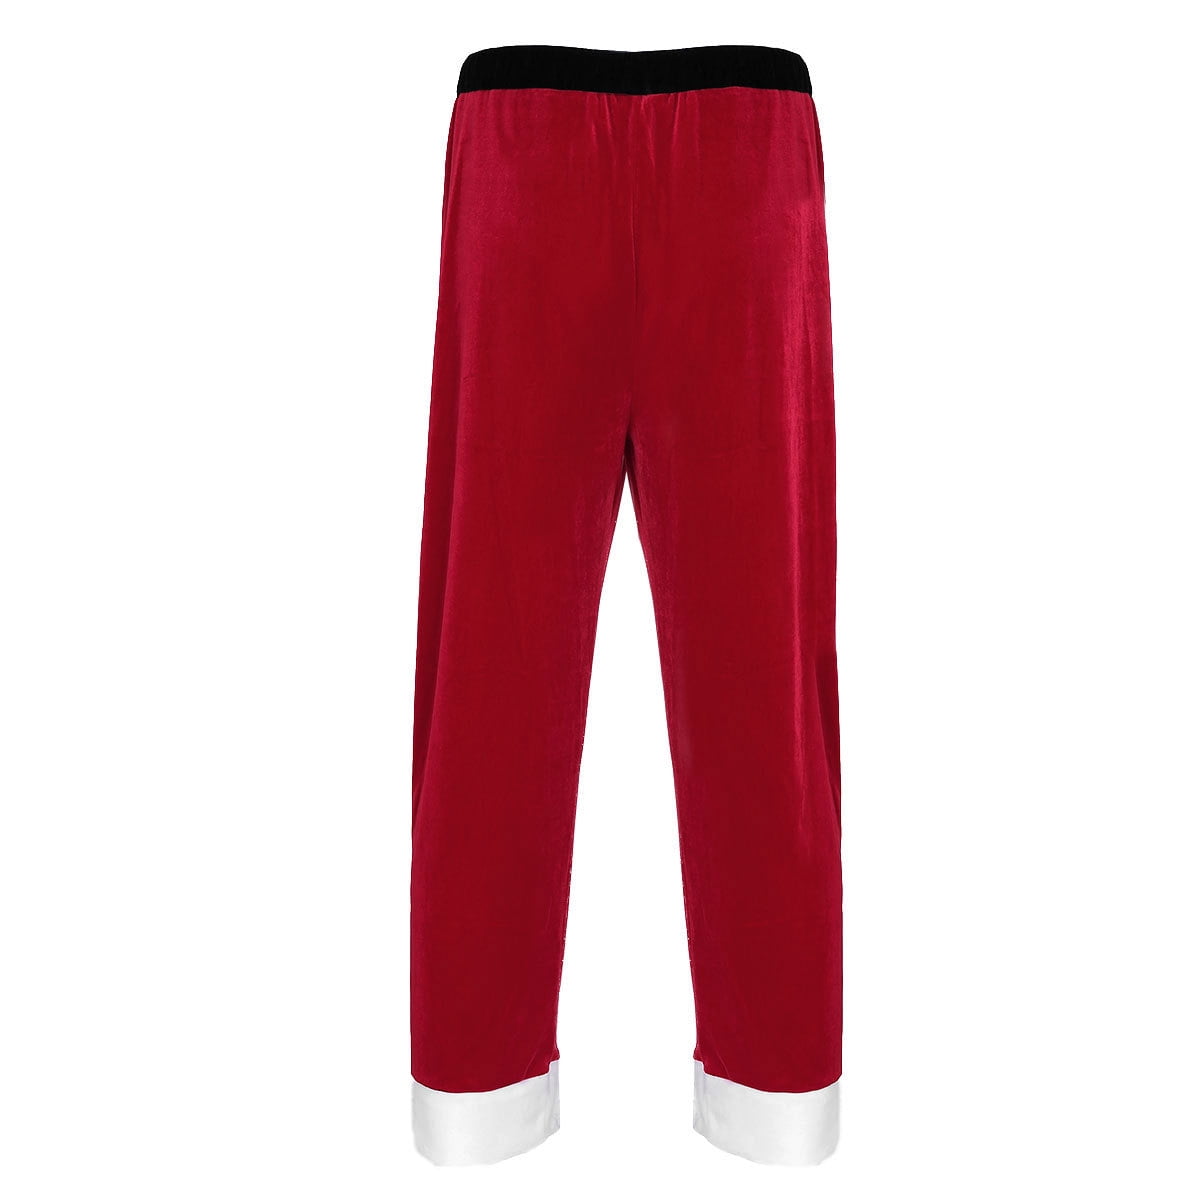 DPOIS Men's Red Velvet Long Pants Trousers Santa Claus Cosplay Trousers  Christmas Red M 